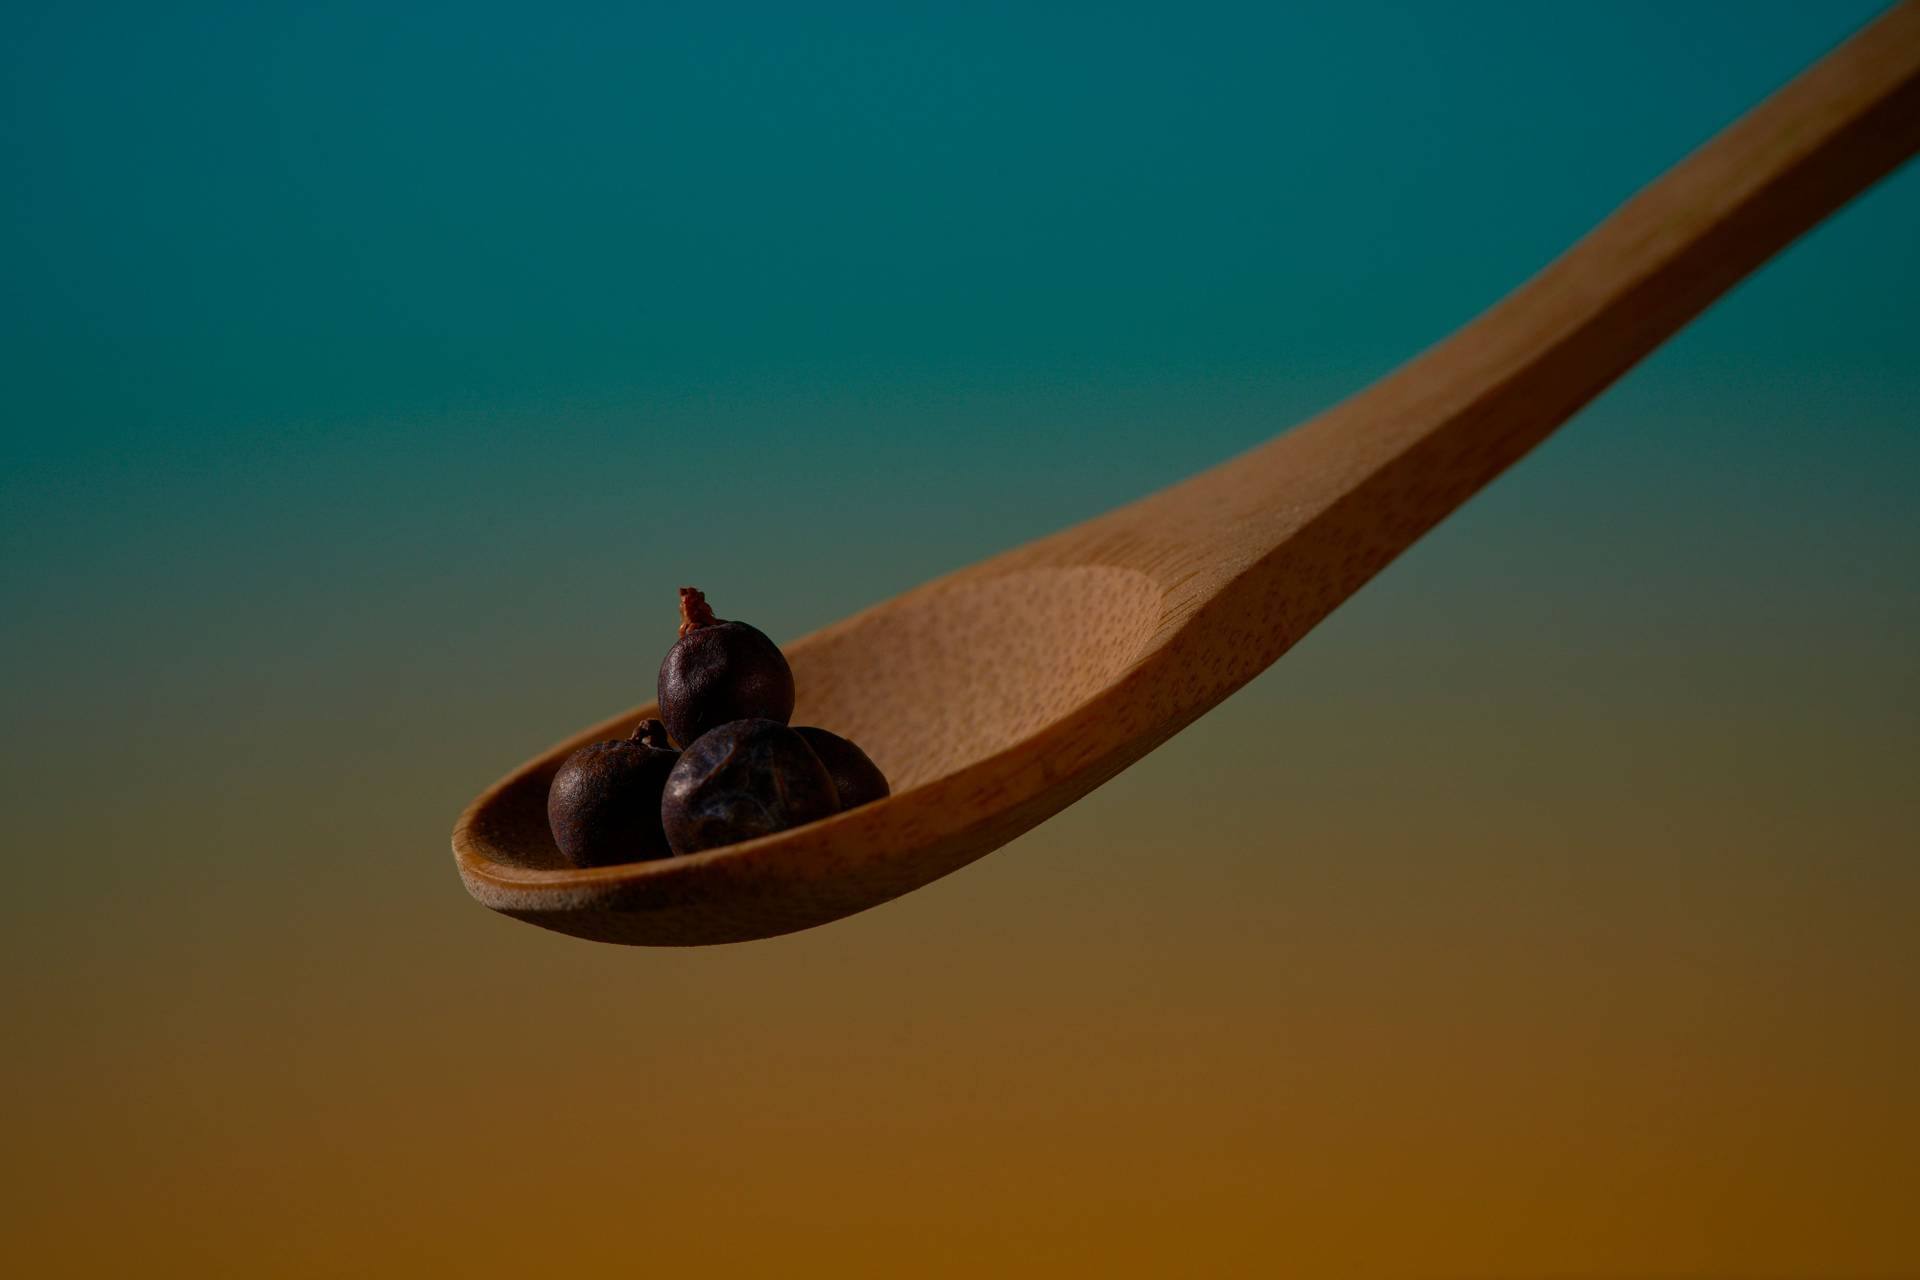 juniper berries on a wooden spoon on blue and orange background